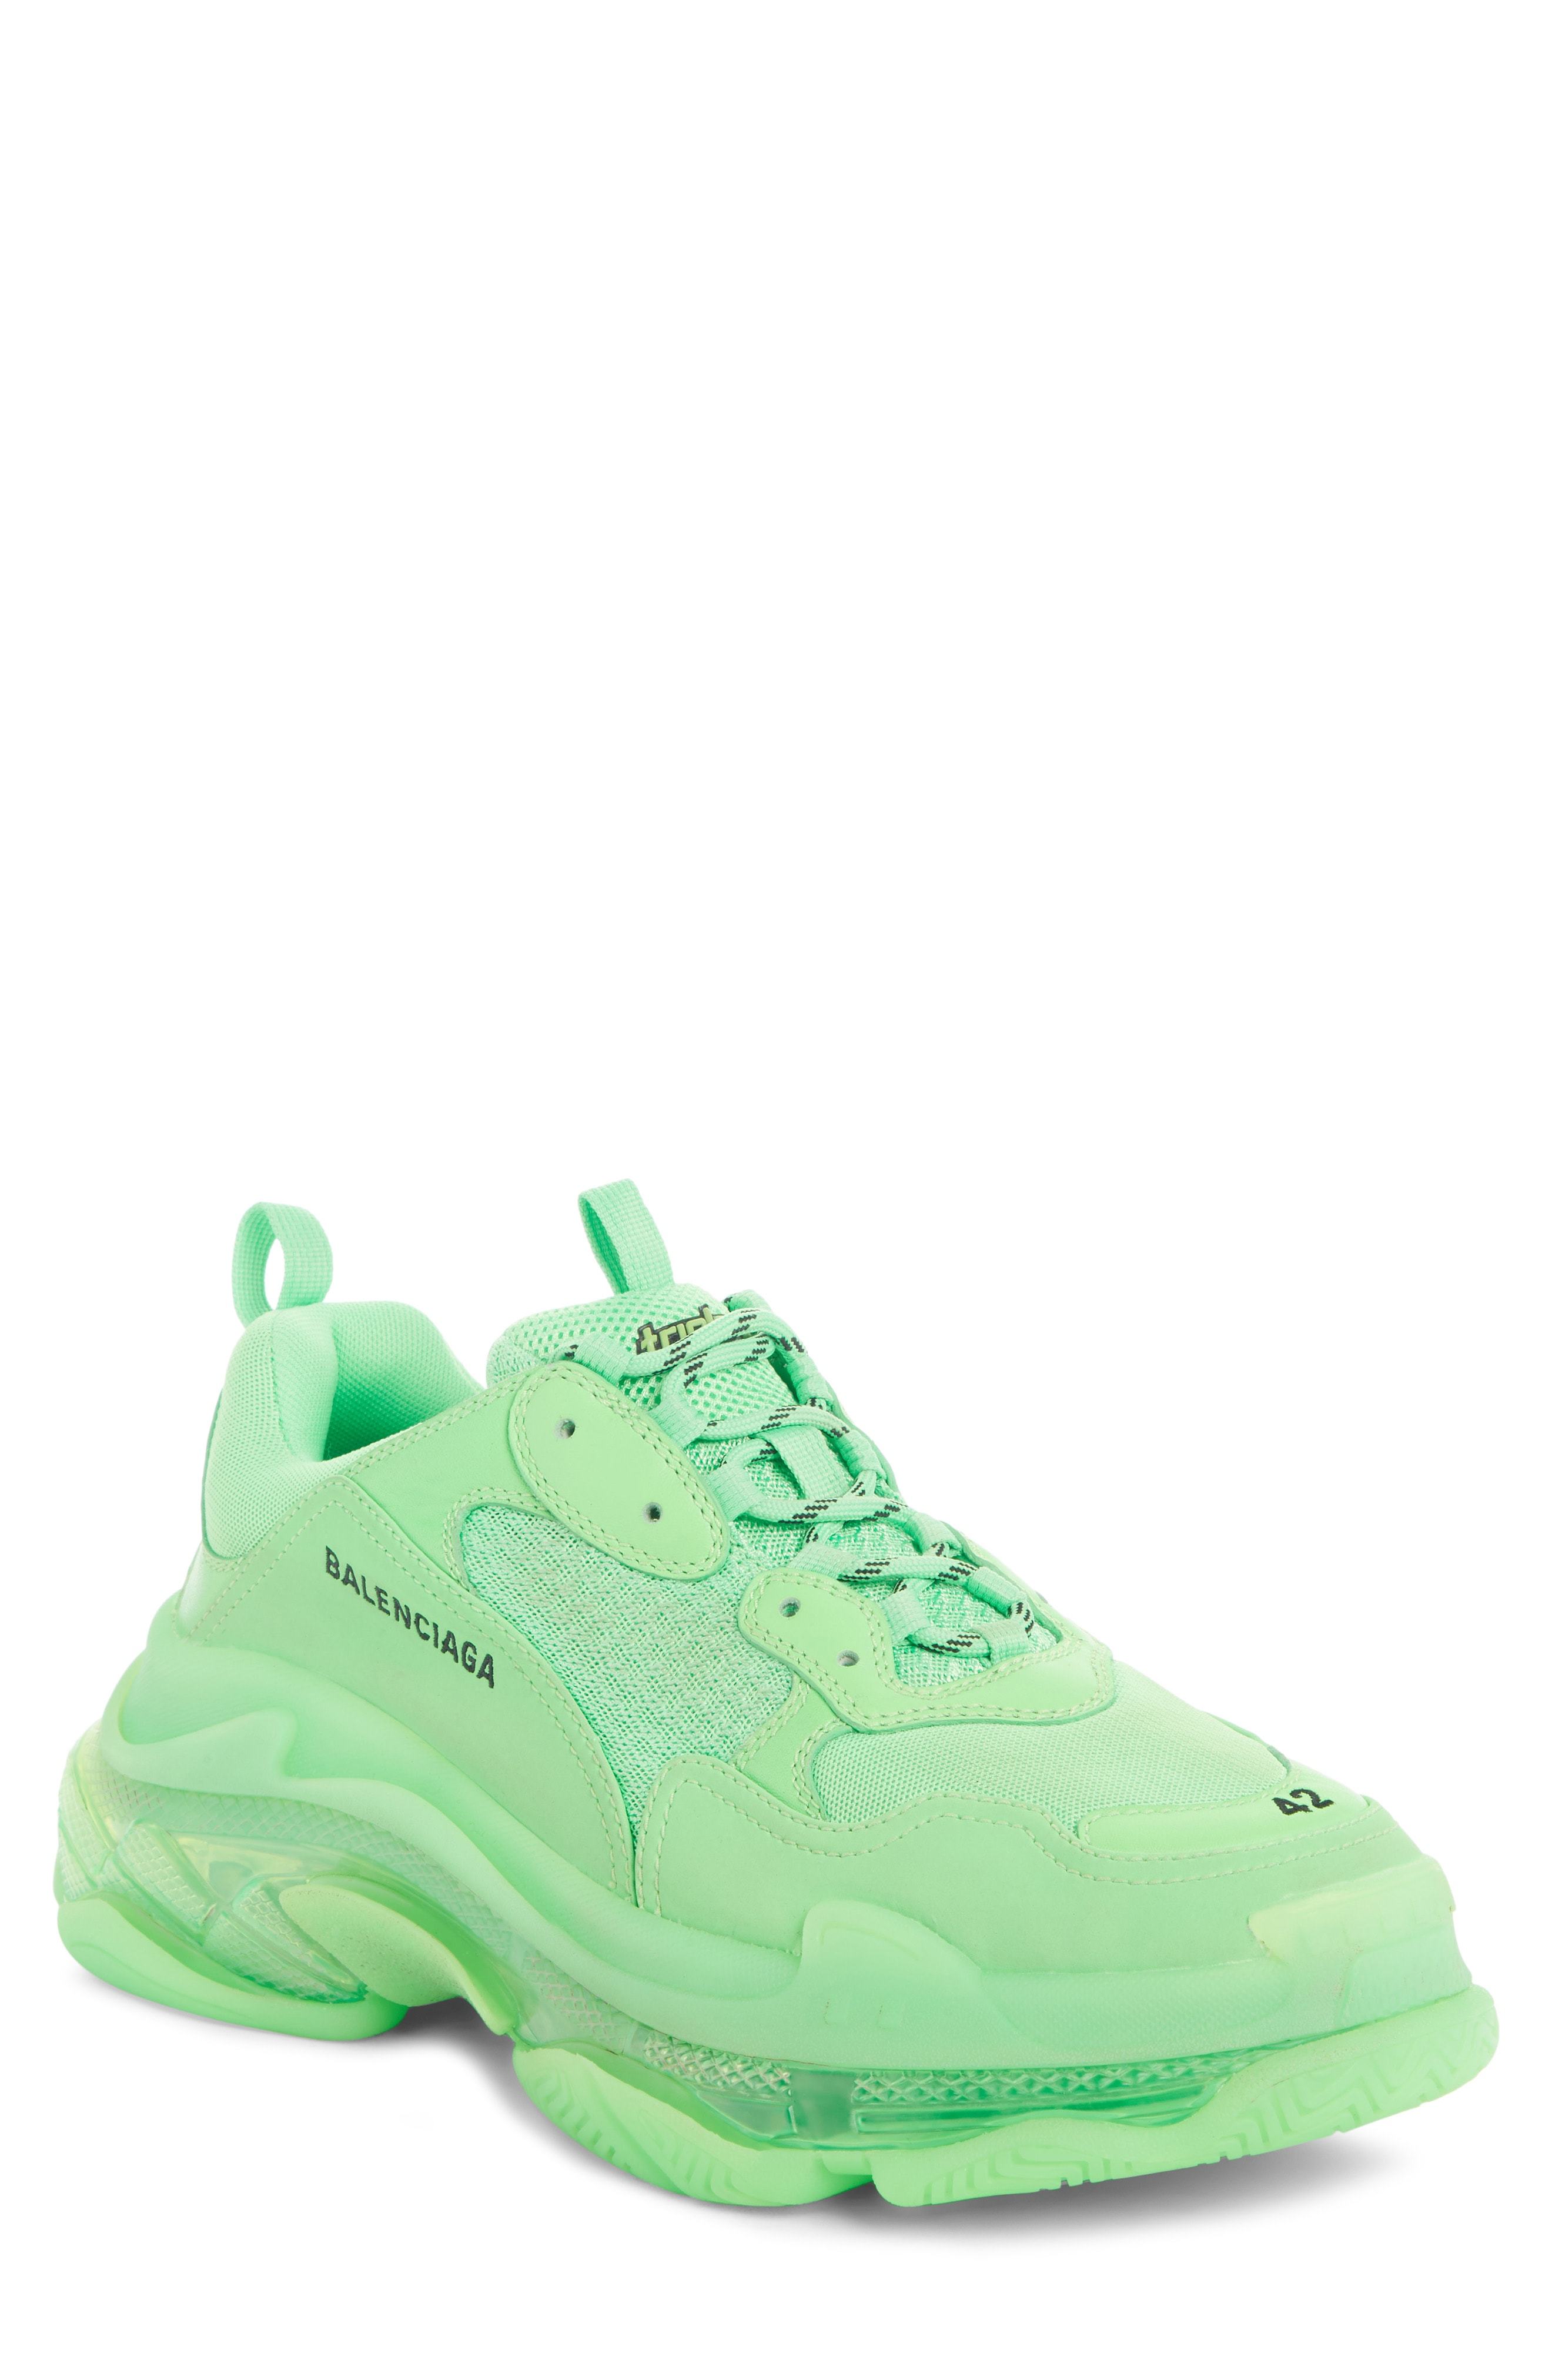 Balenciaga Leather Triple S Trainers Save 48% Lyst